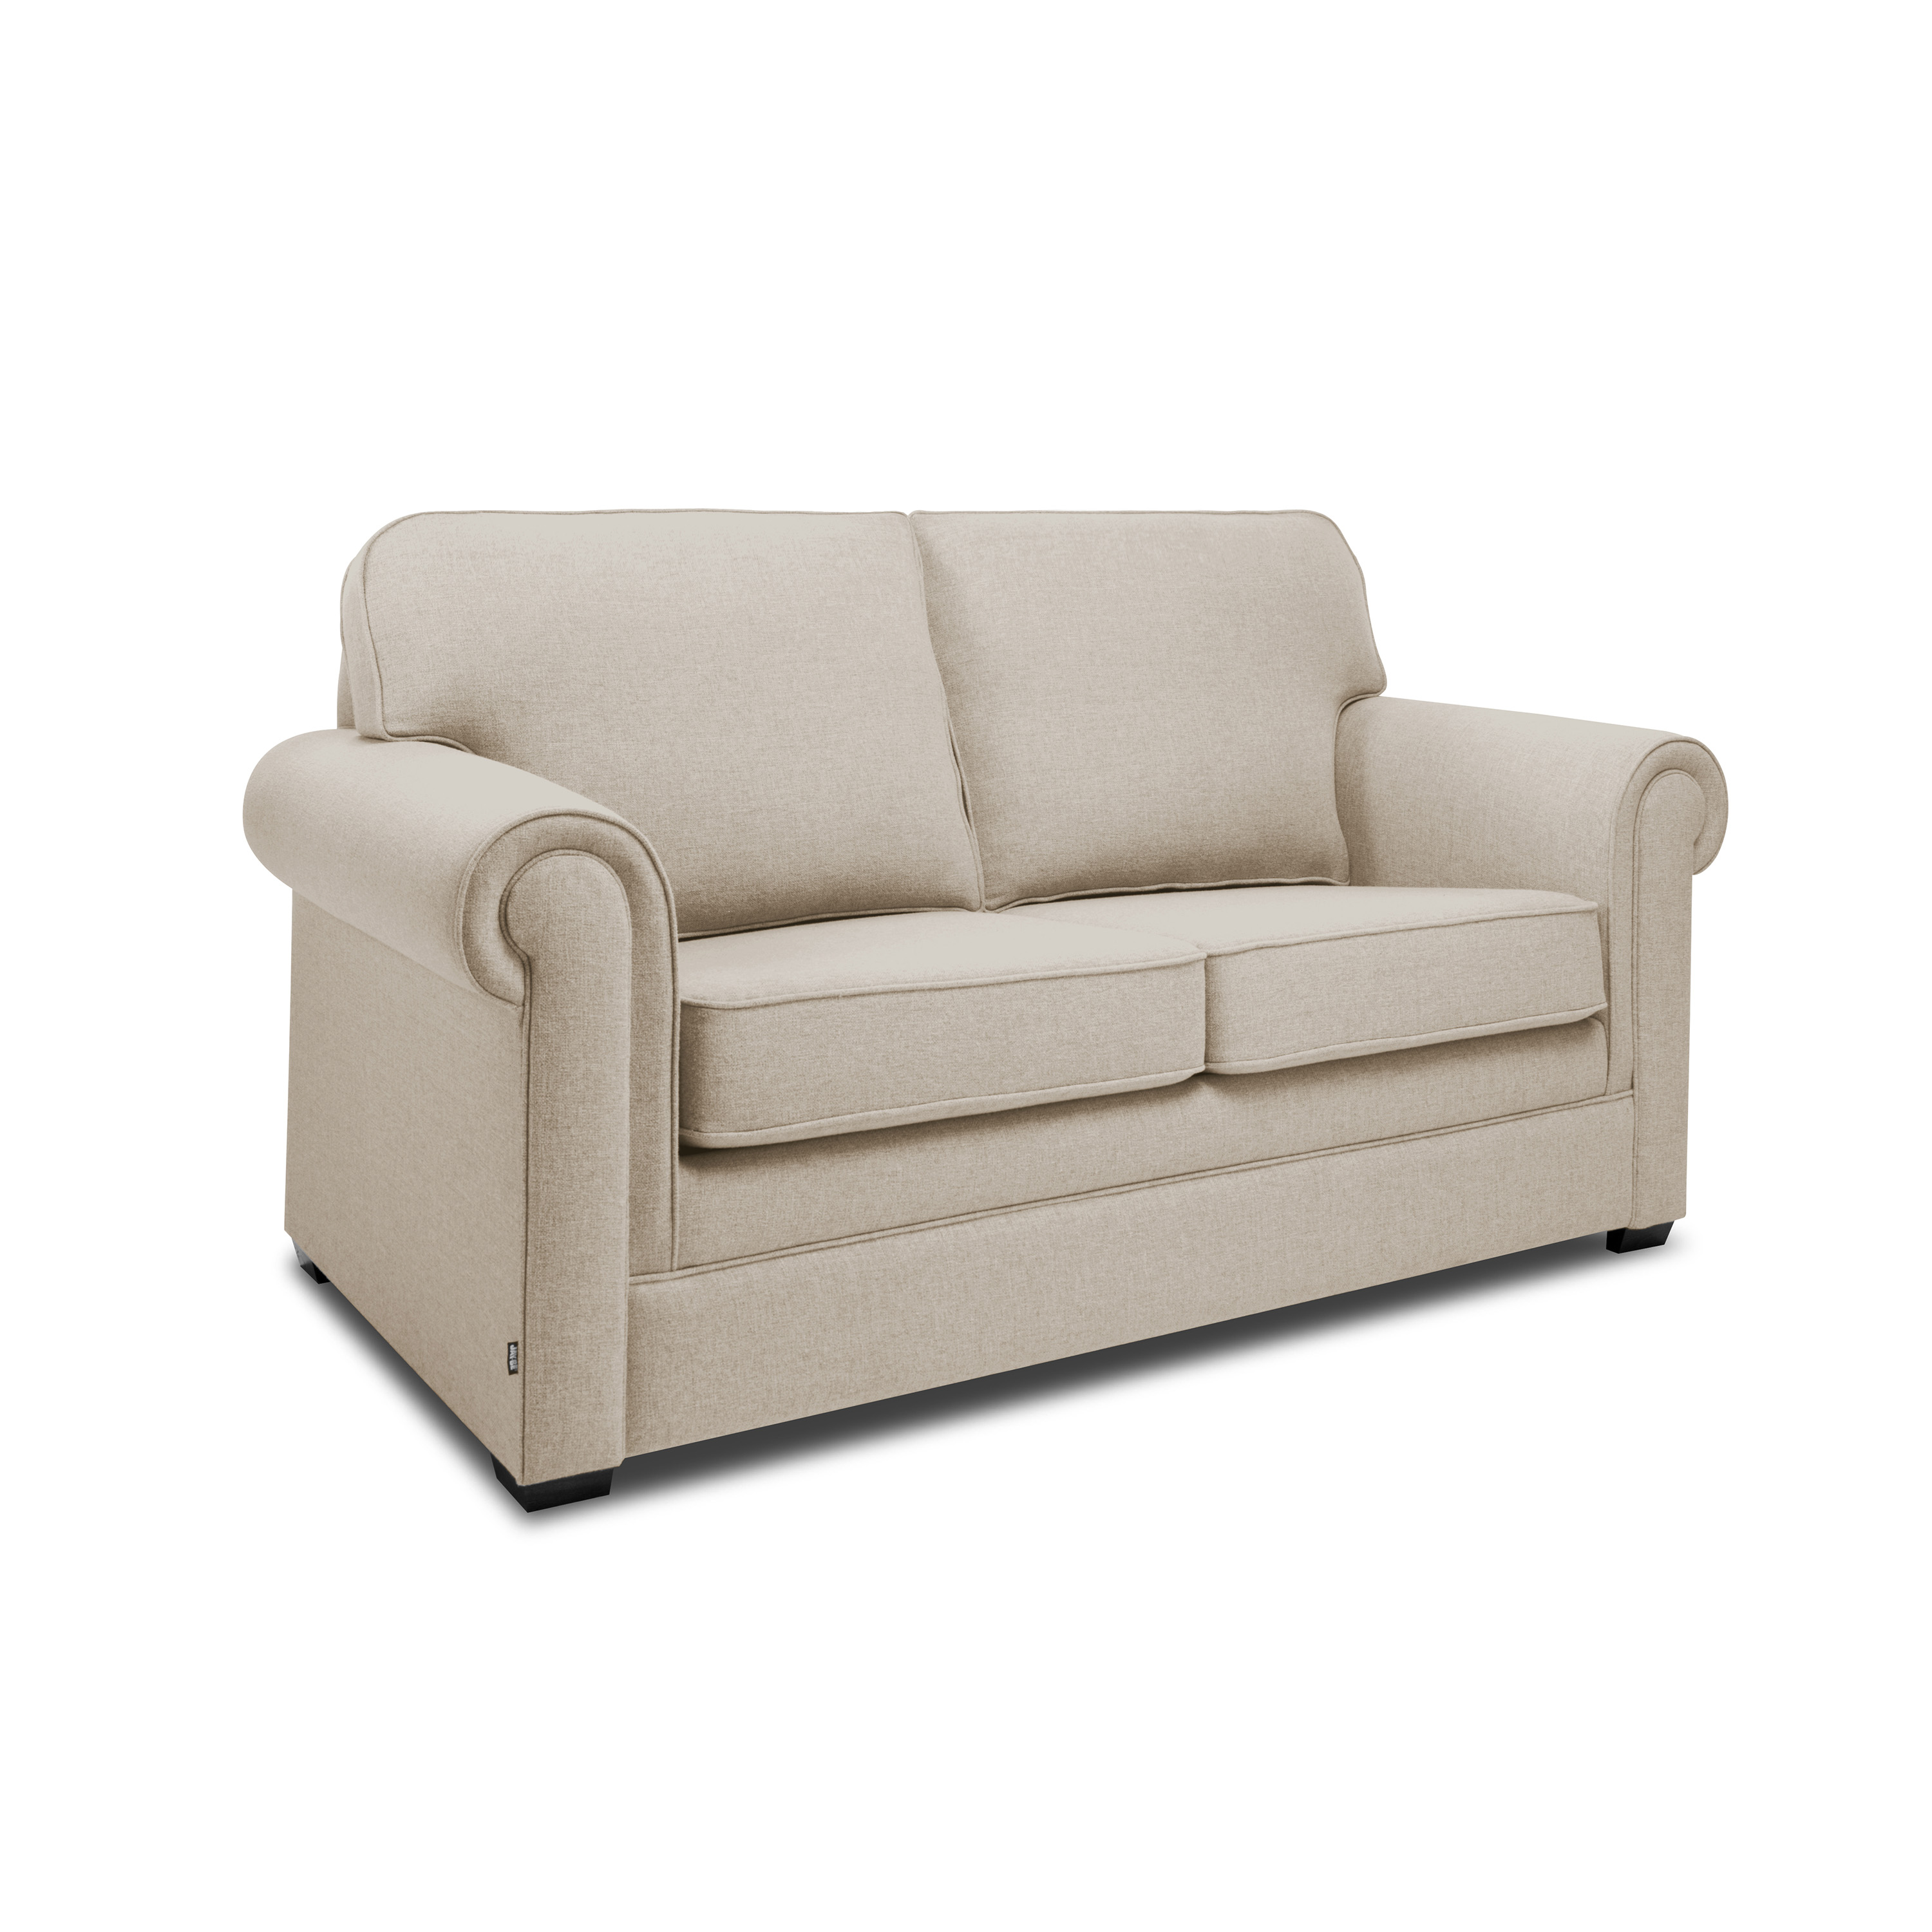 Jay-Be Classic Sofa Bed